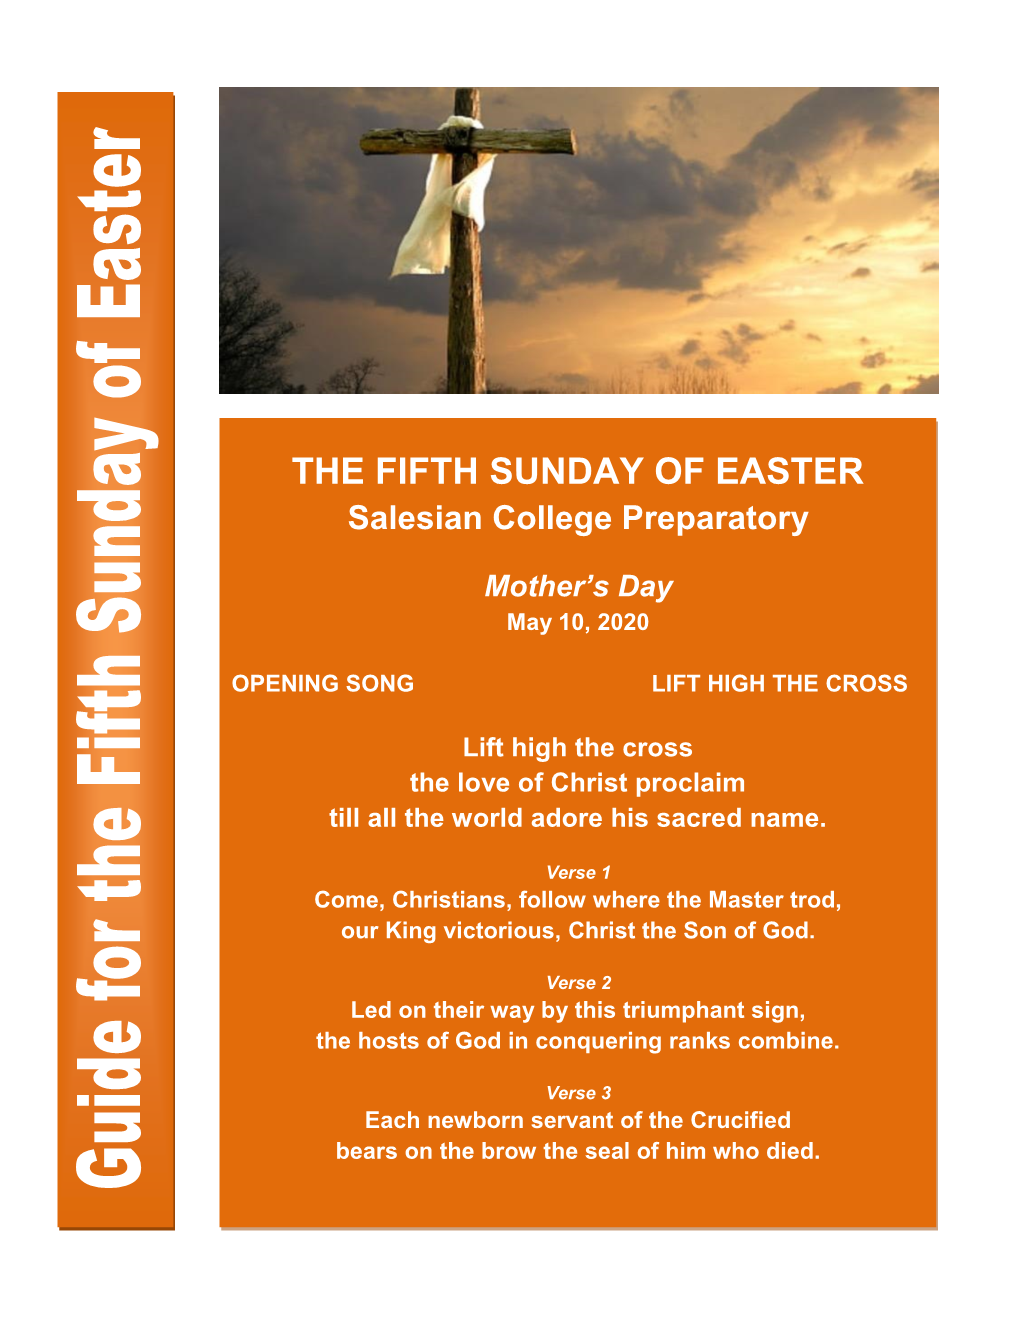 May 10, 2020 Fifth Sunday of Easter Mass Guide